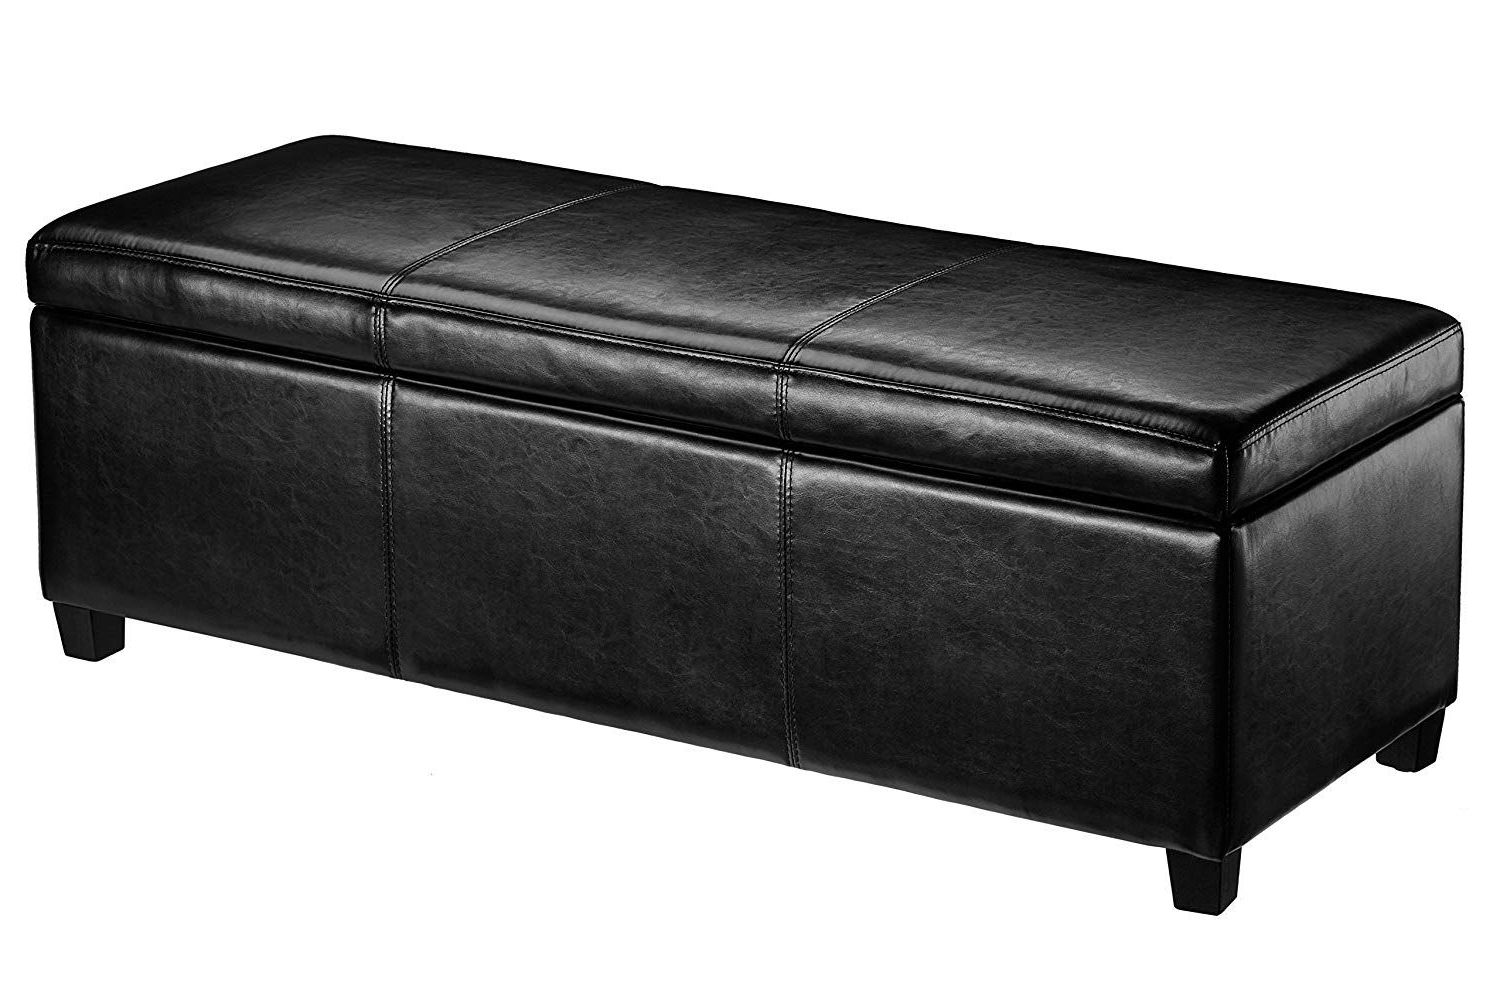 Popular First Hill Madison Rectangular Faux Leather Storage Ottoman Bench Intended For Black Leather Ottomans (View 5 of 10)